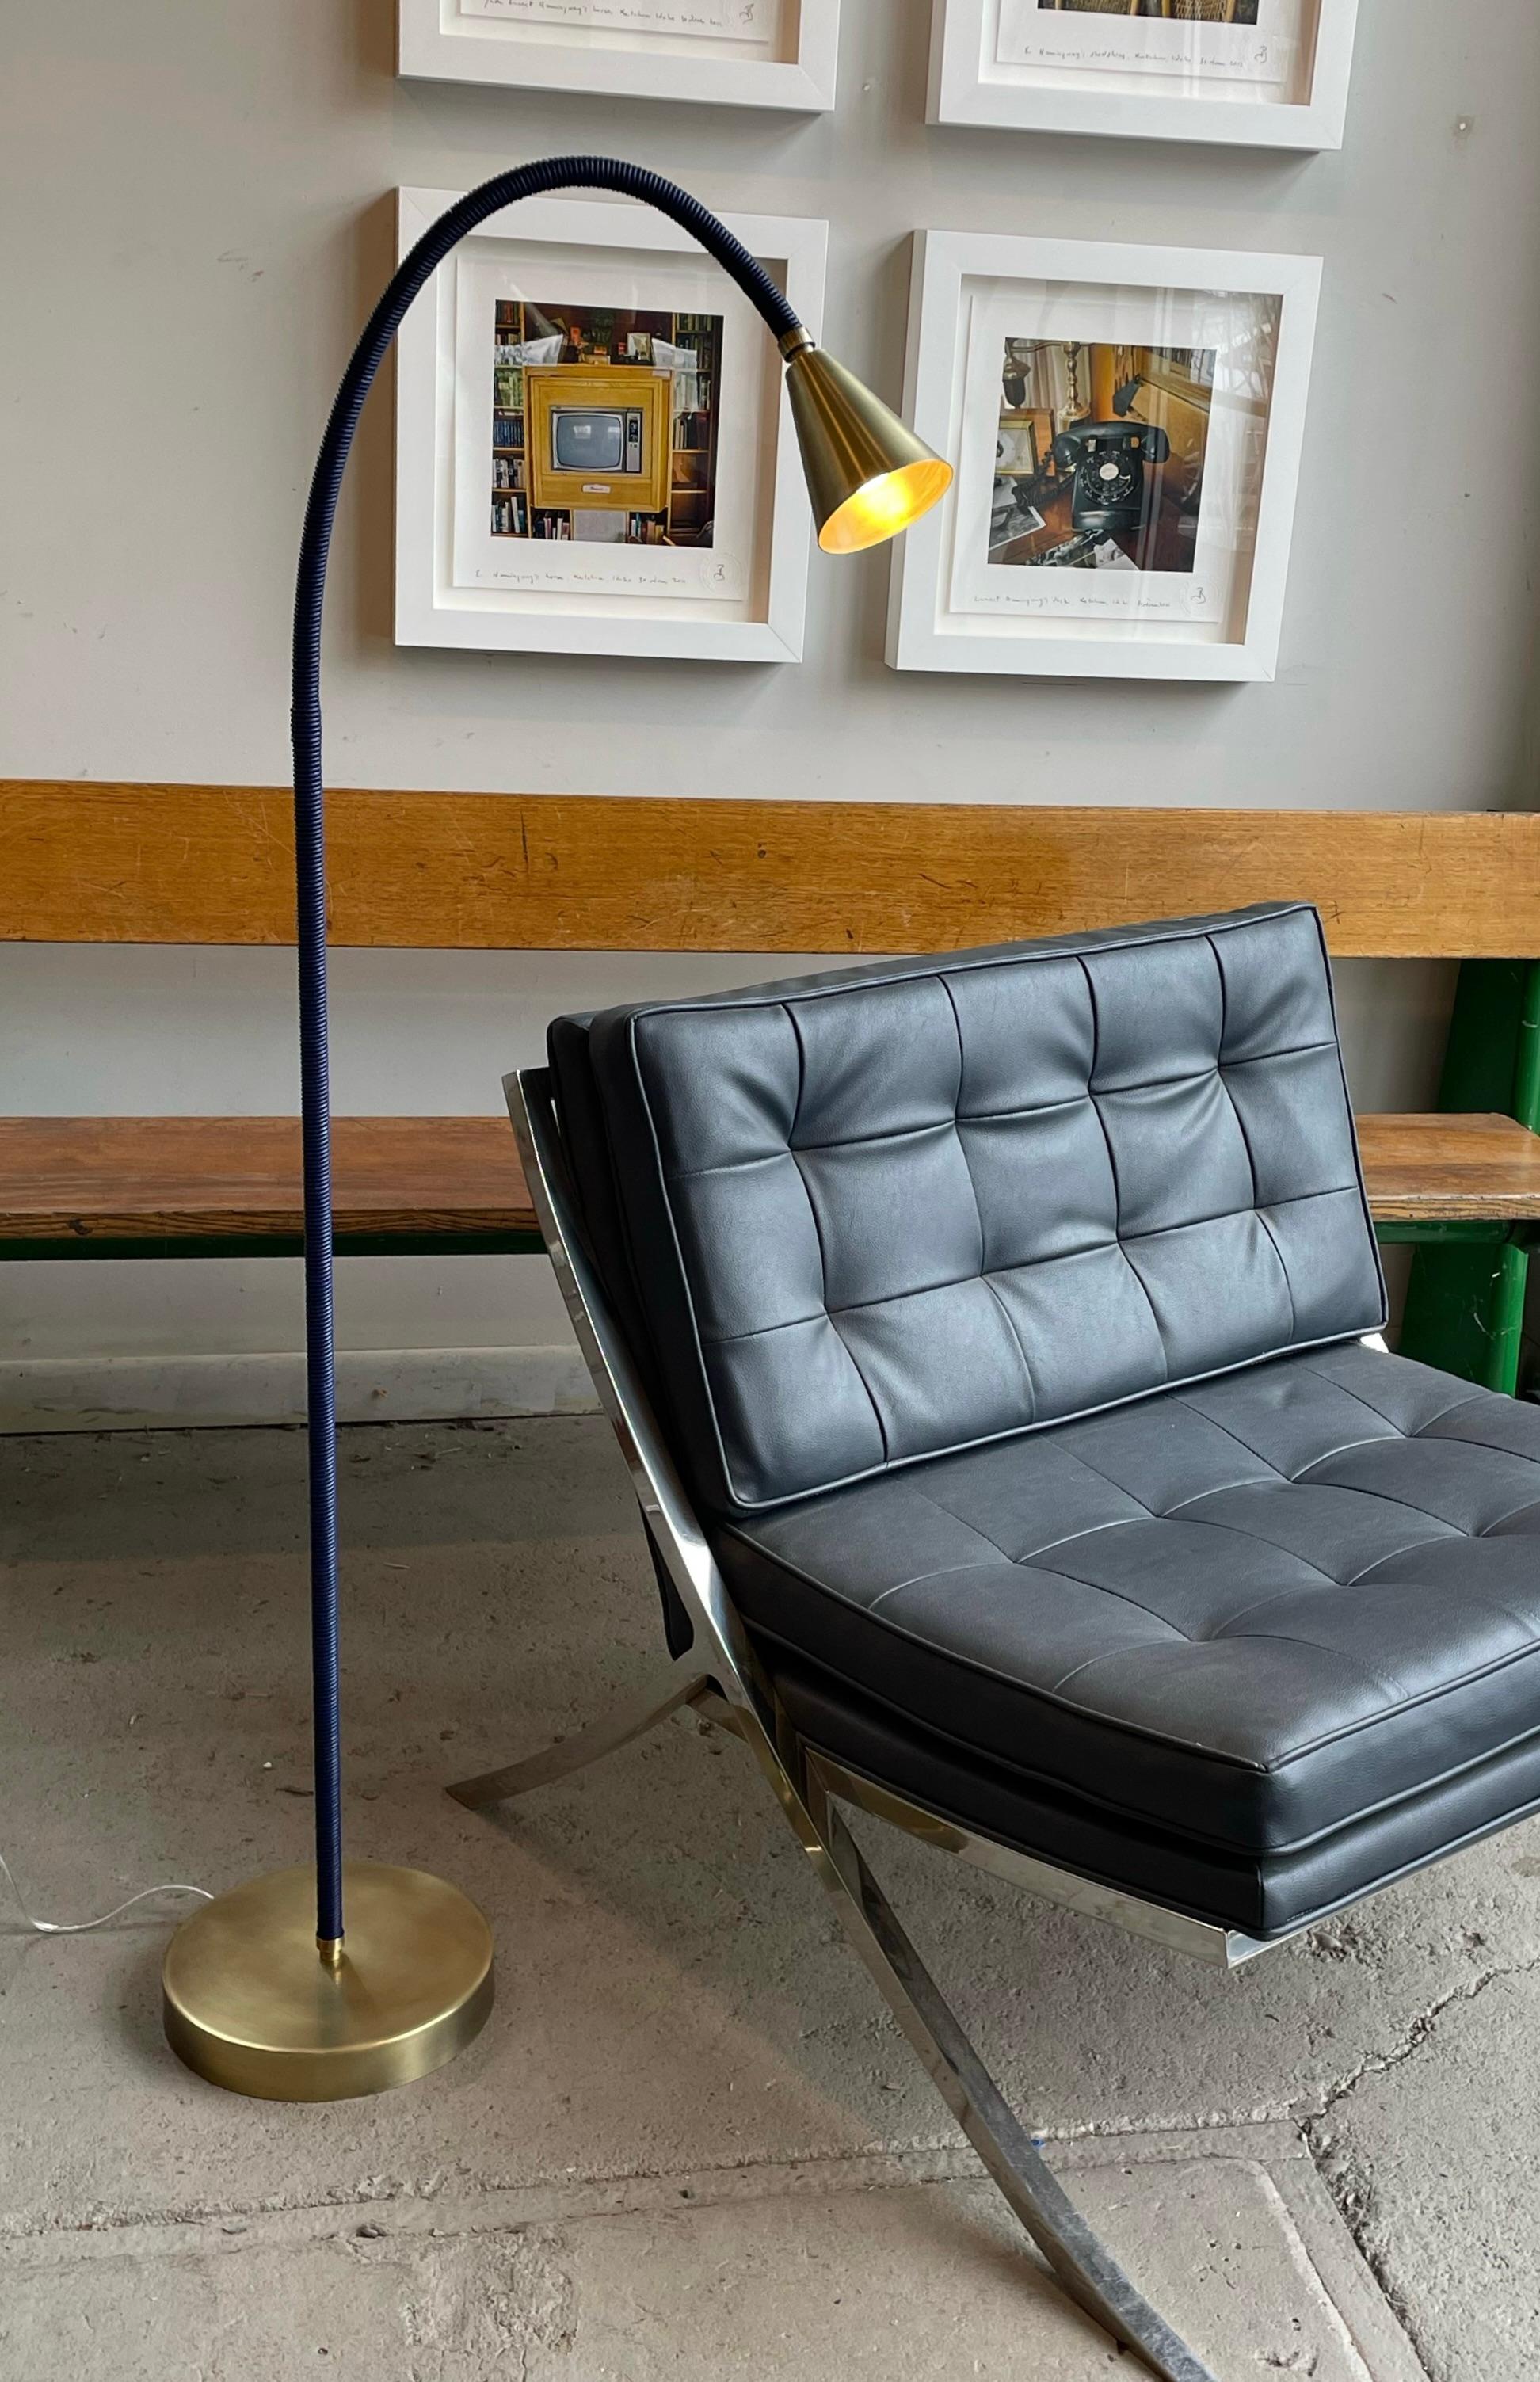 Meander Floor Lamp, with one leather wrapped flex arm. 
Sculptural, textural, colorful, flexible floor lamp. Shine a light on your favorite reading material or pose as you wish to add flair to any room.
Choose from over 25 leather colors and 5